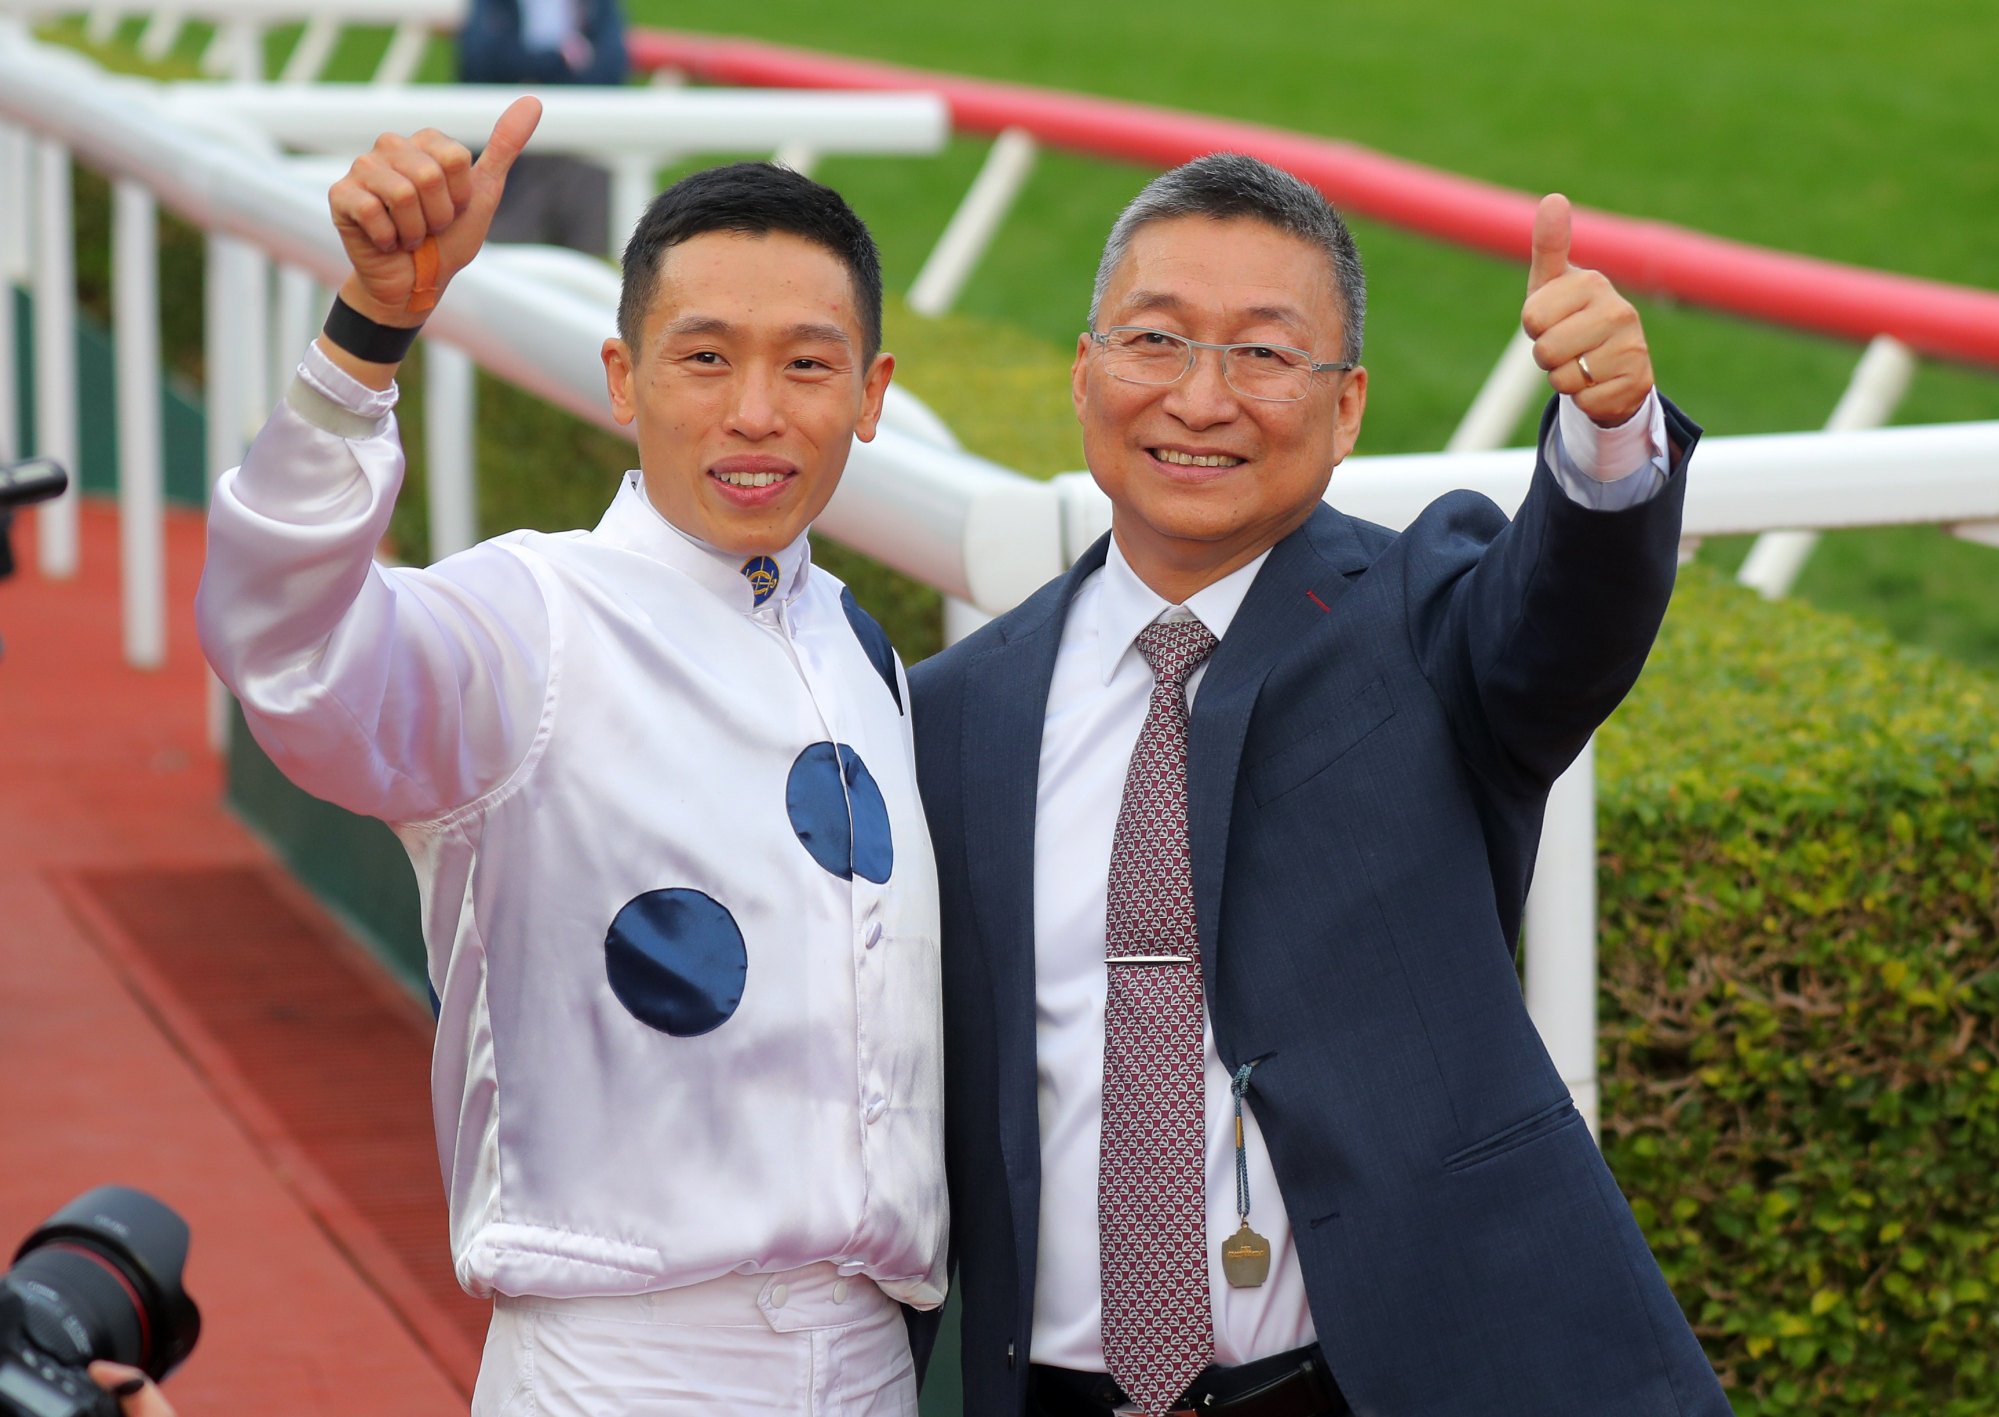 Jockey Vincent Ho and trainer Francis Lui enjoy Golden Sixty’s victory.